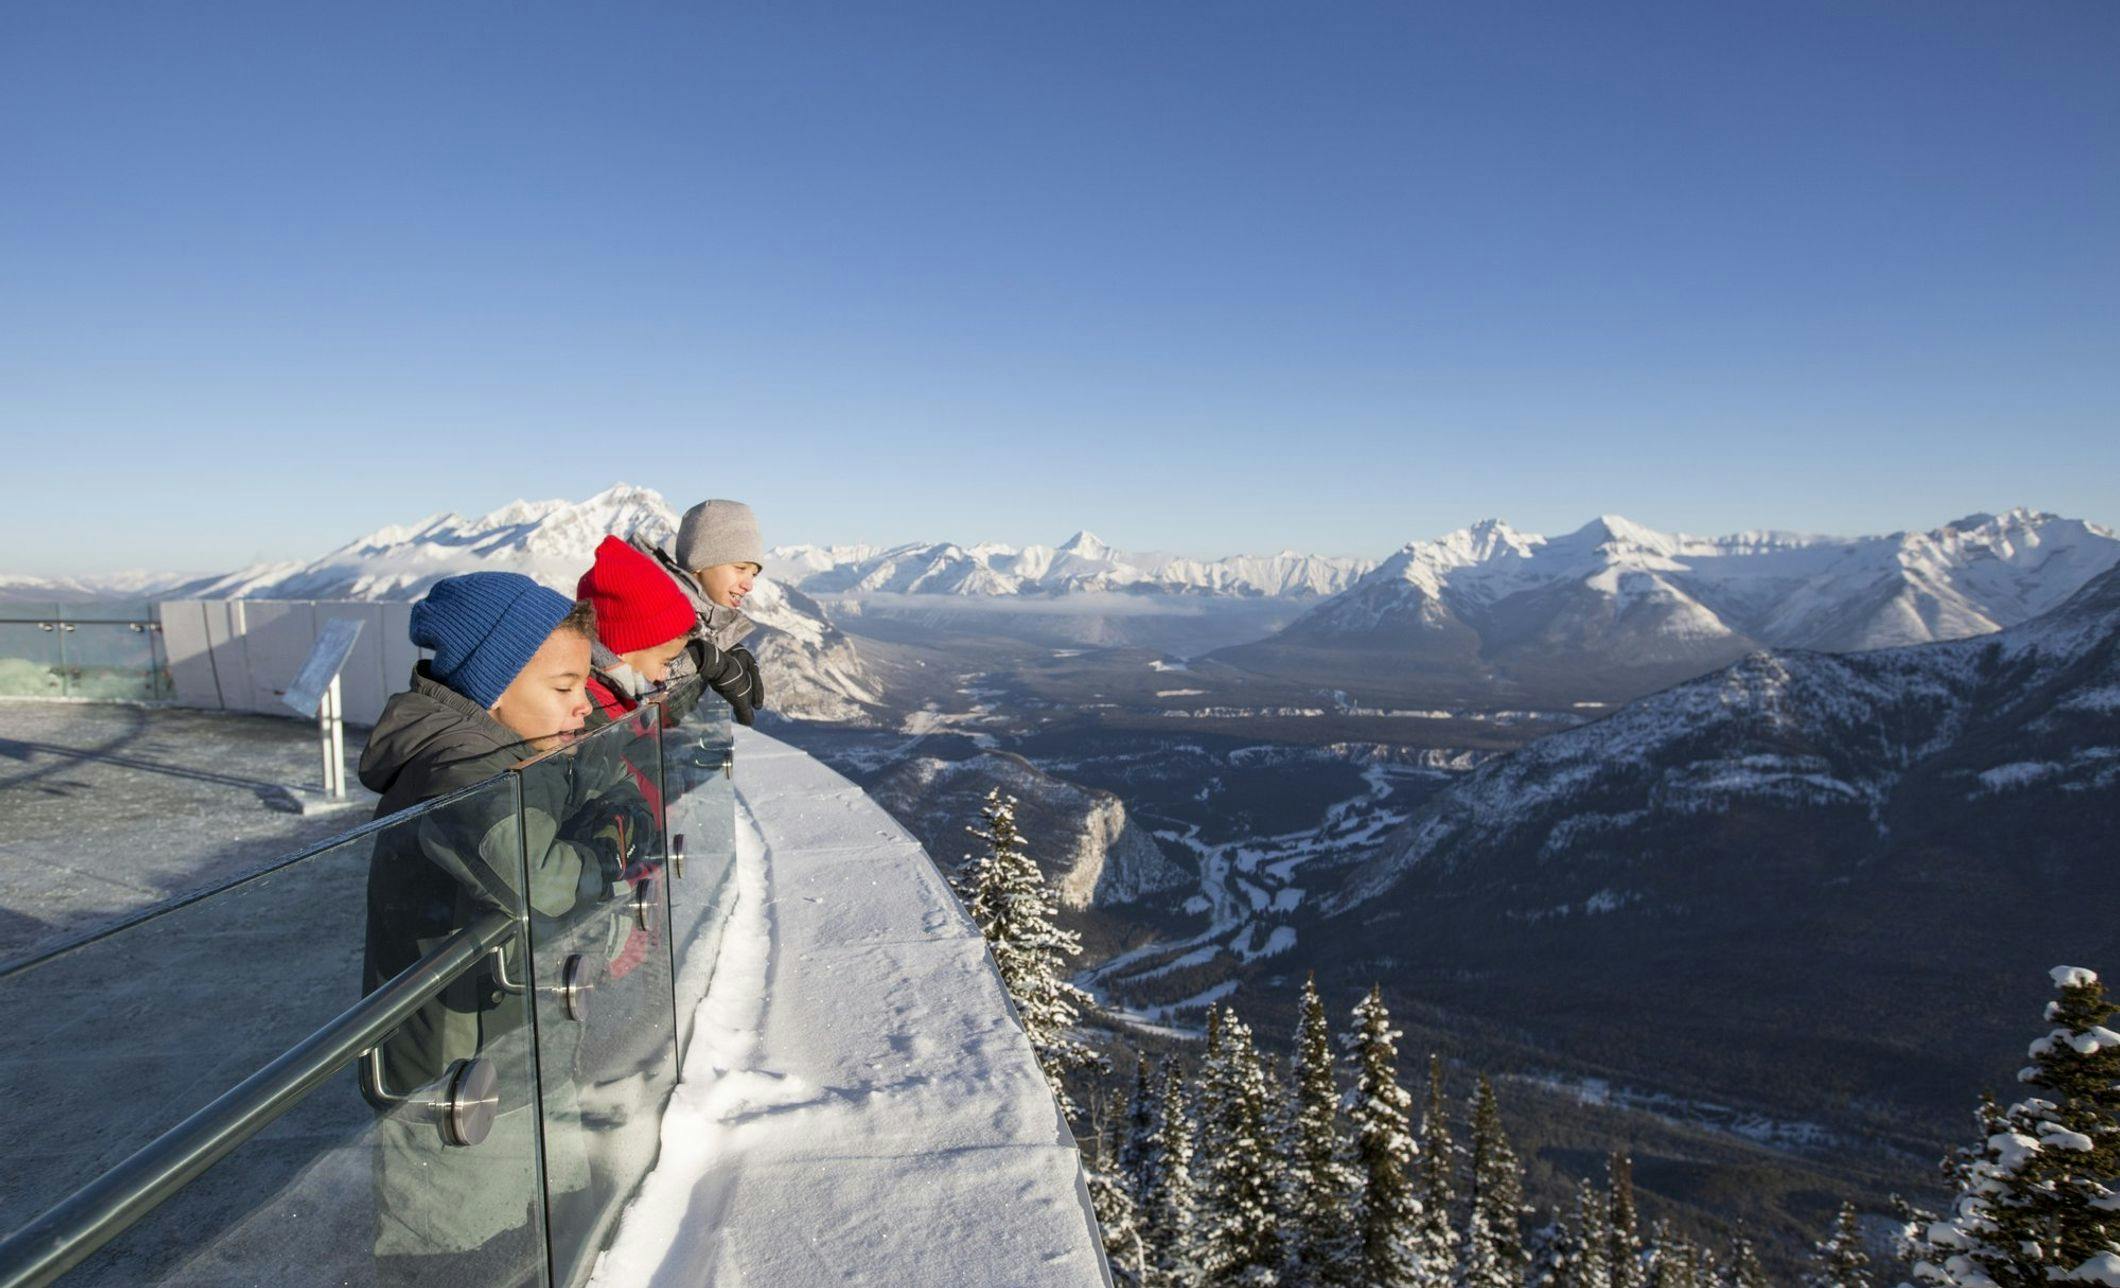 Three young boys looking over the viewing platform deck at the Banff Gondola on a snowy winter day